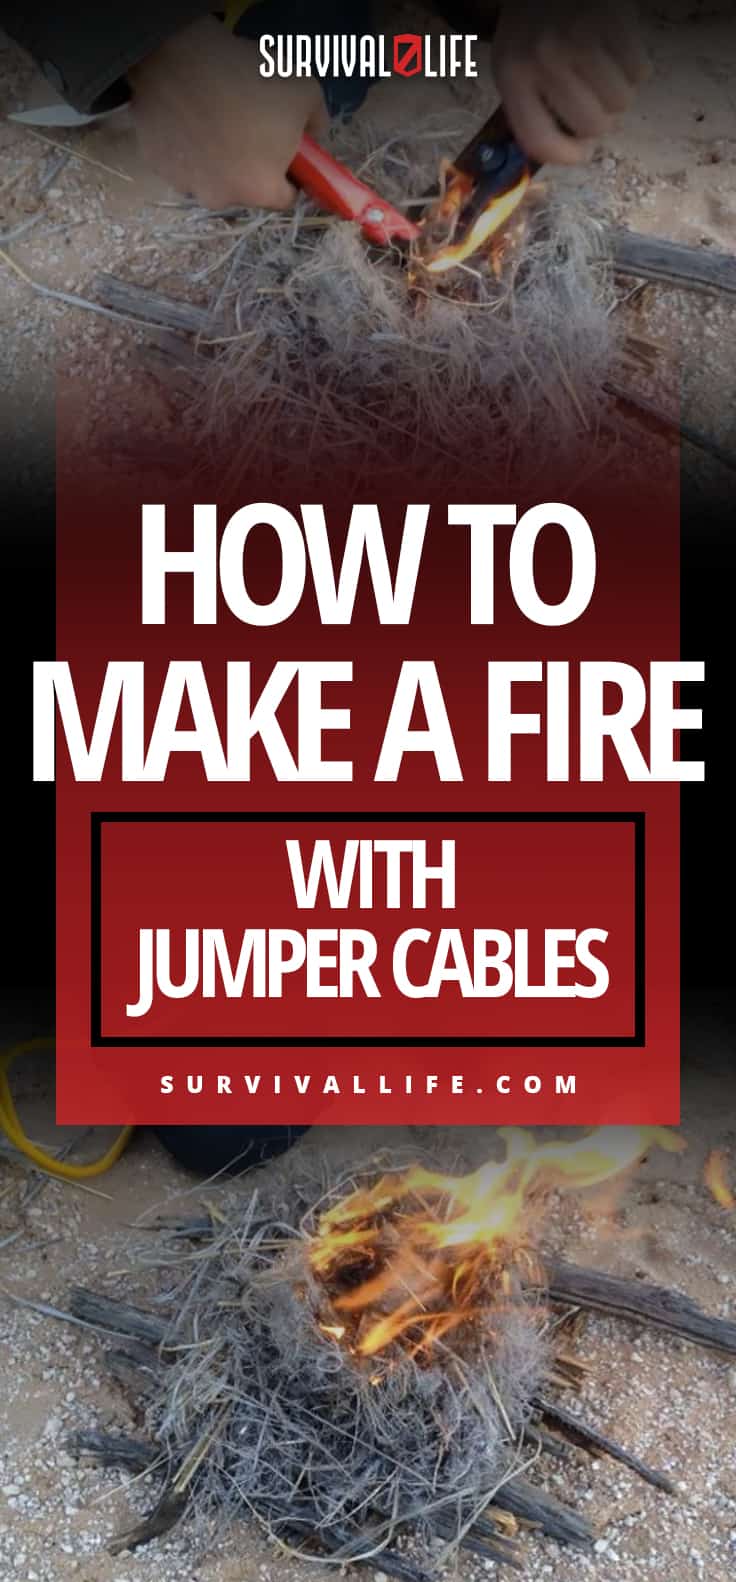 How To Make A Fire With Jumper Cables